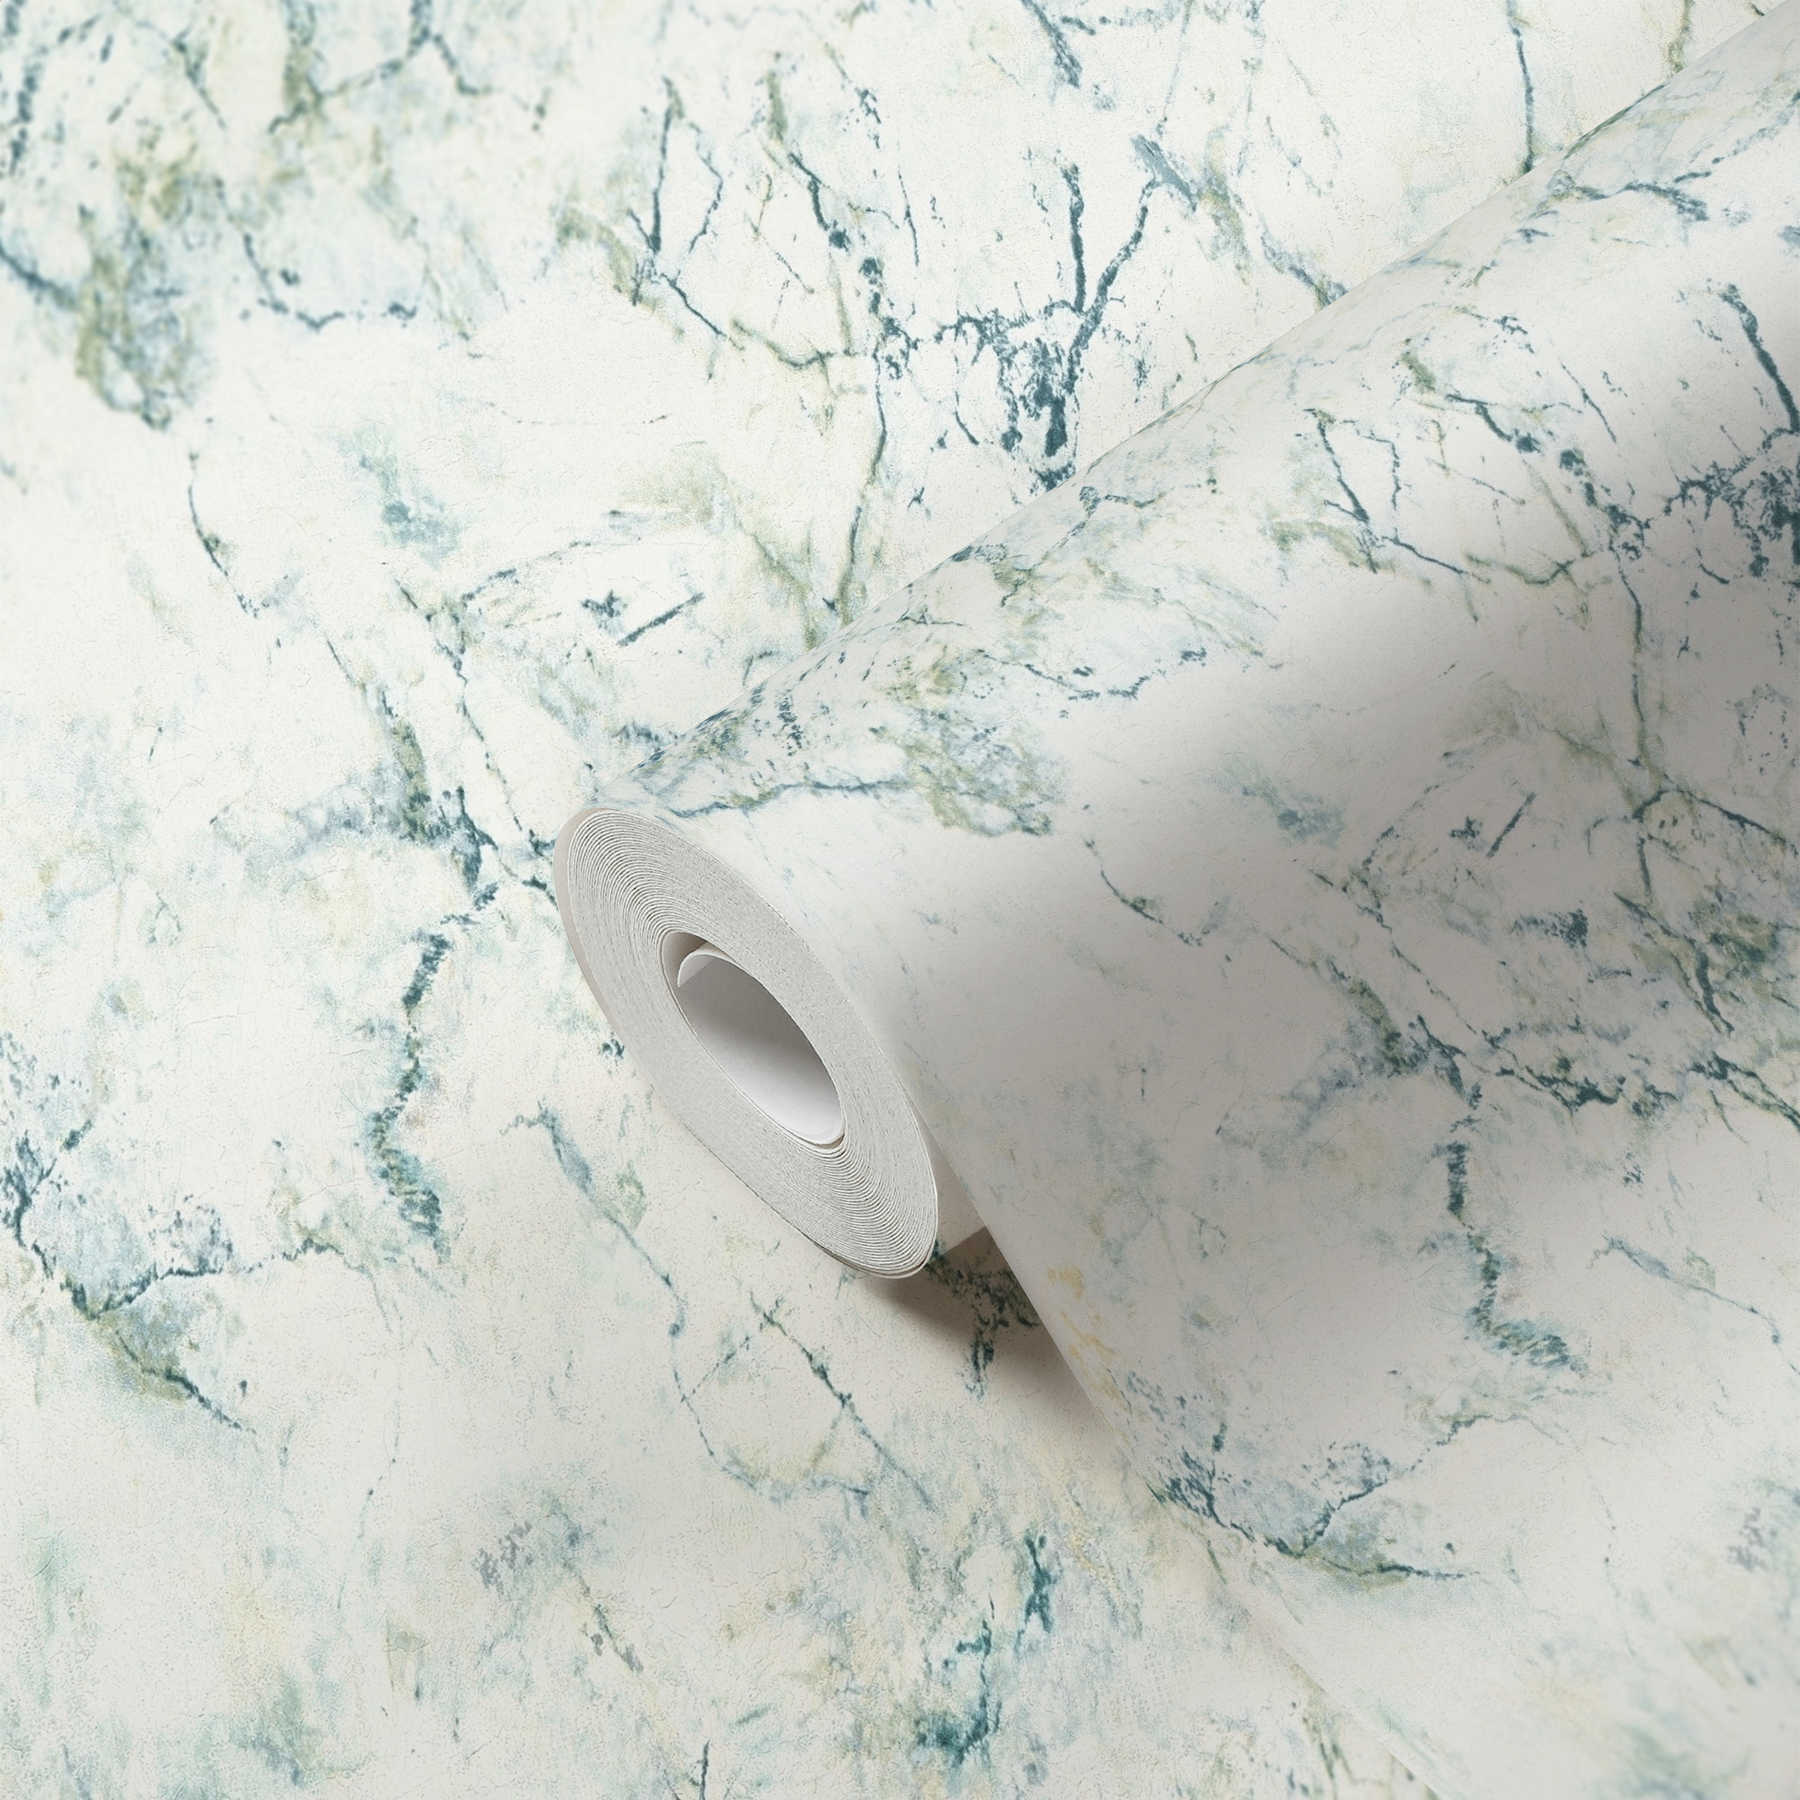             Non-woven wallpaper with fine marble look - white, grey, black, blue
        